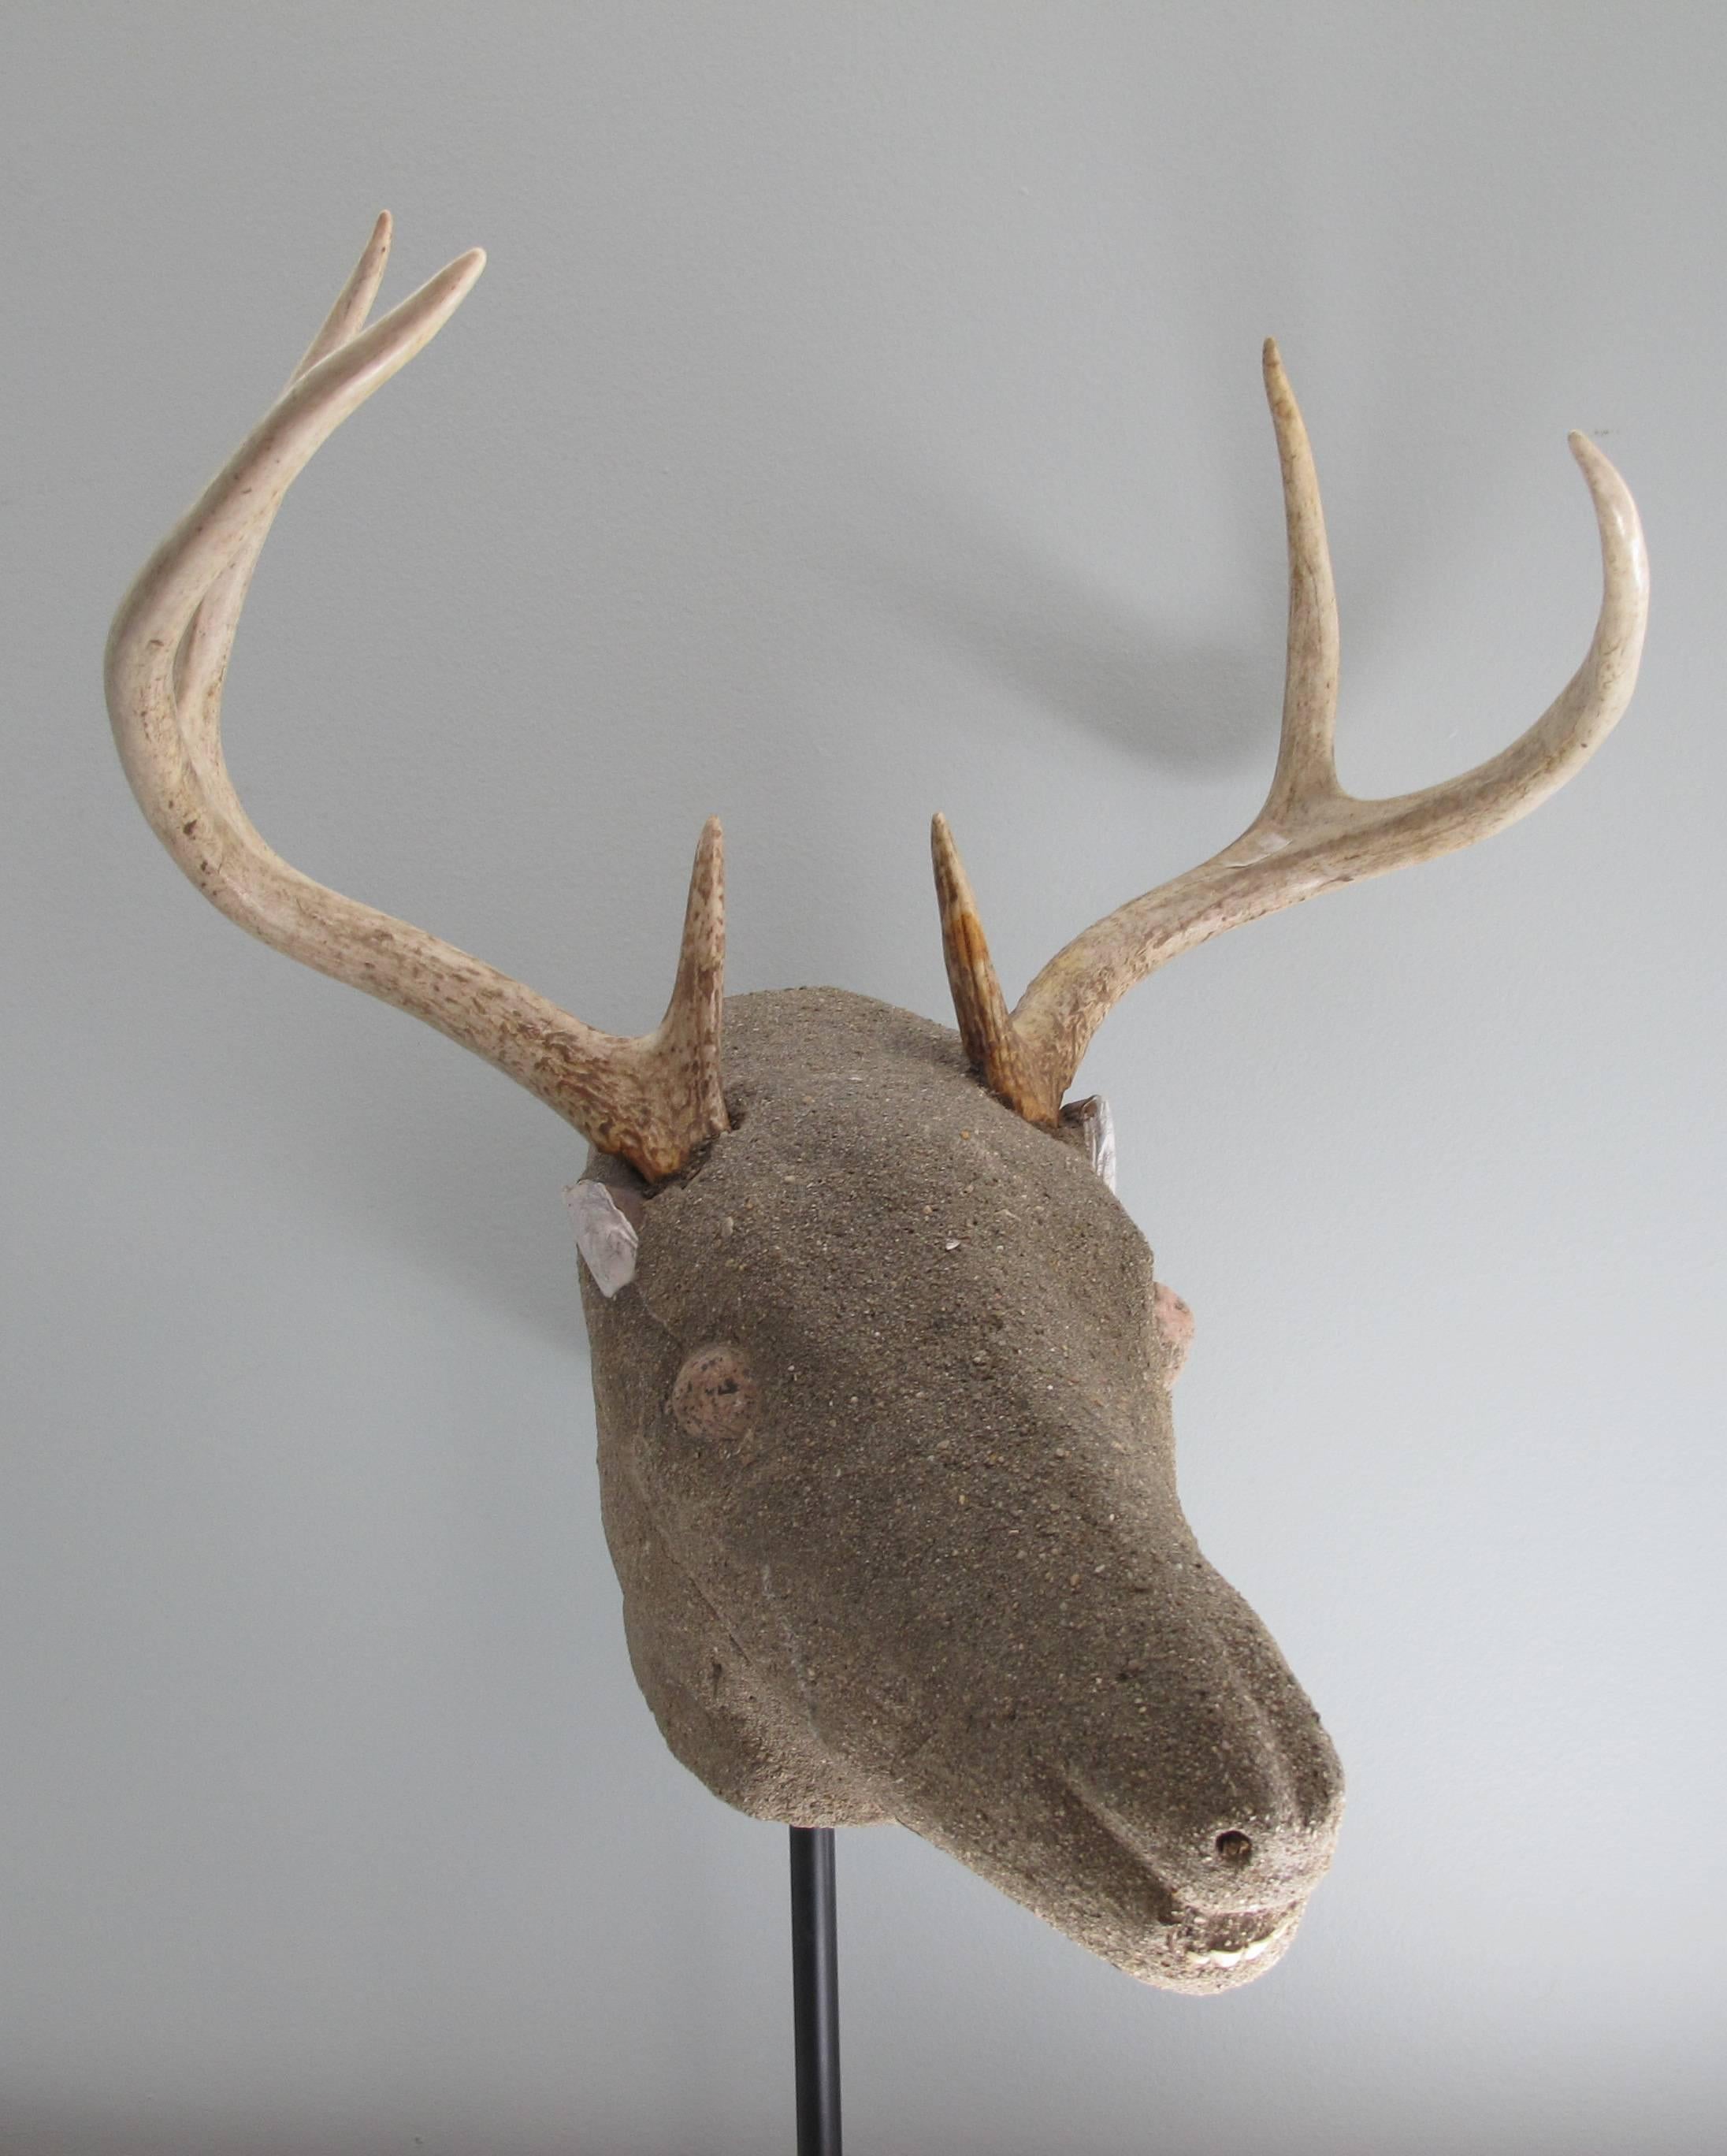 Unusual deer head with antlers stone eyes and shell ears made from cement. Made by unknown maker. who was a skilled cement worker. Mounted on modern metal stand (removable).